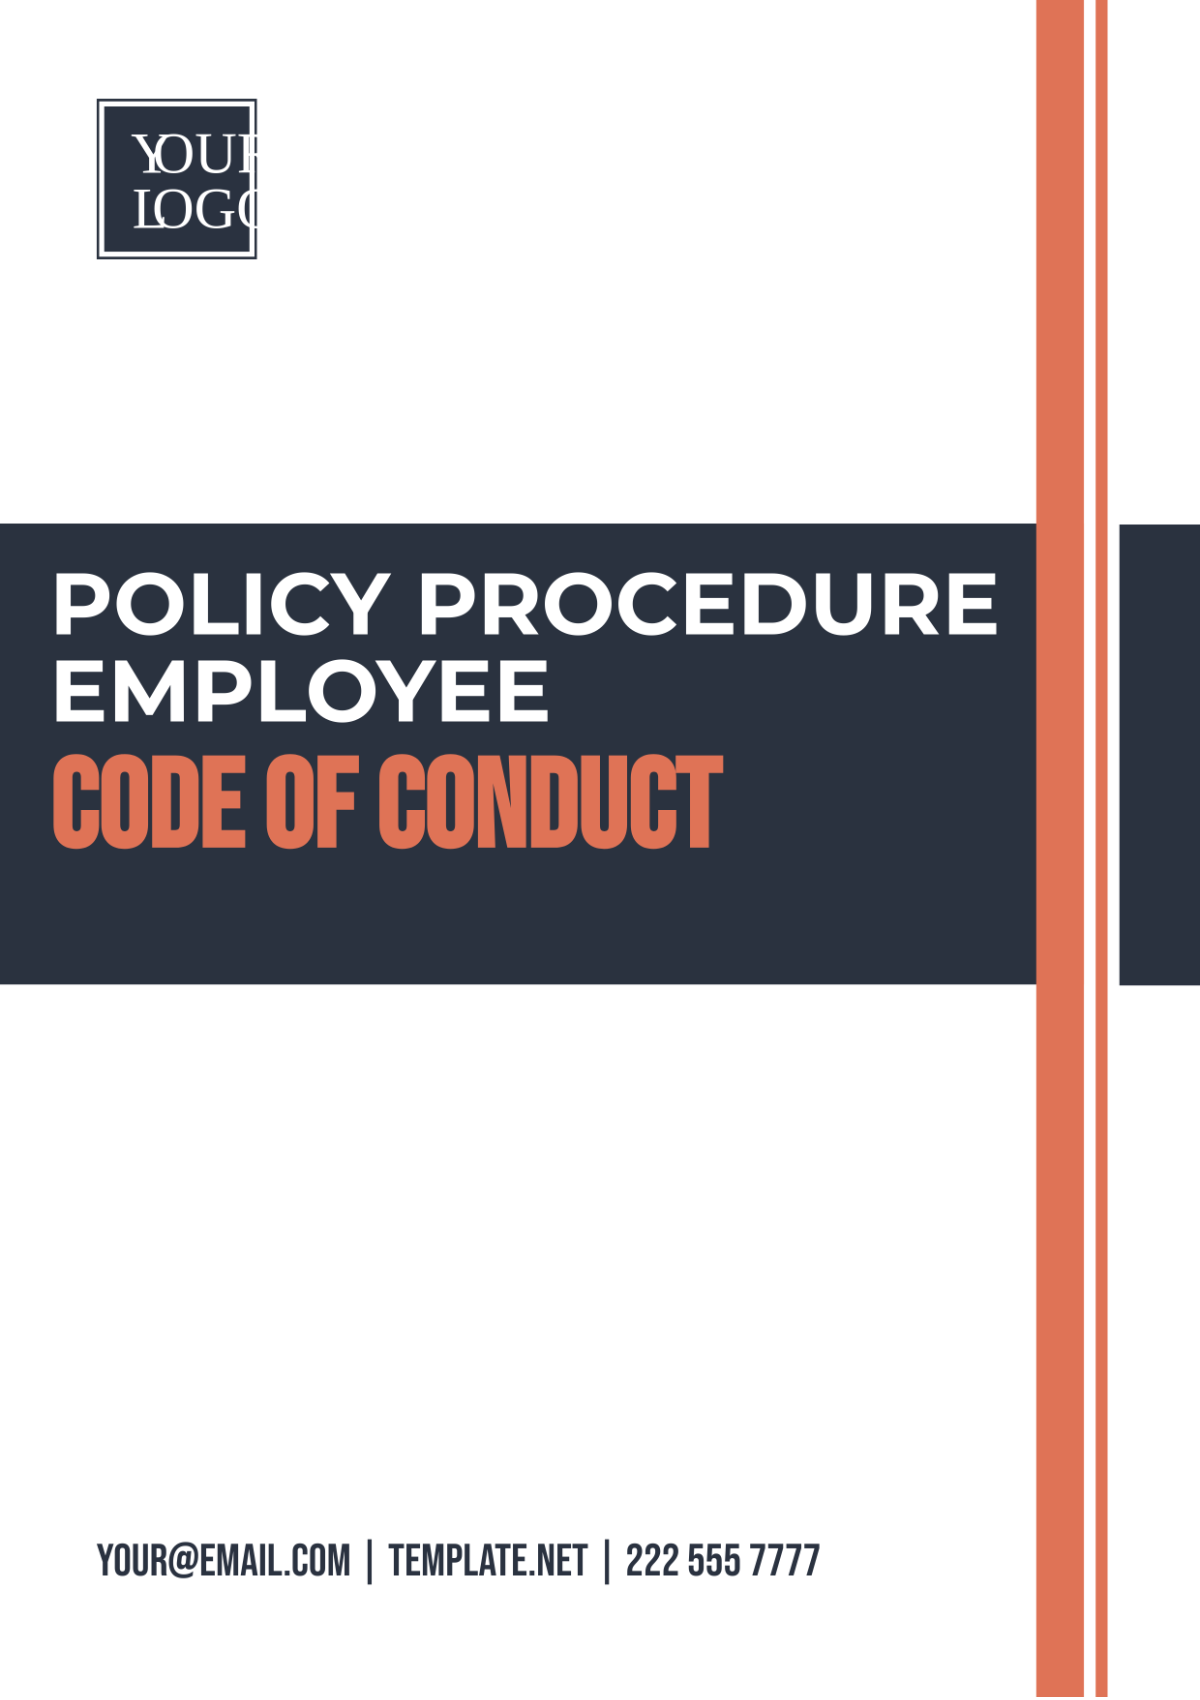 Free Policy Procedure Employee Code of Conduct Template